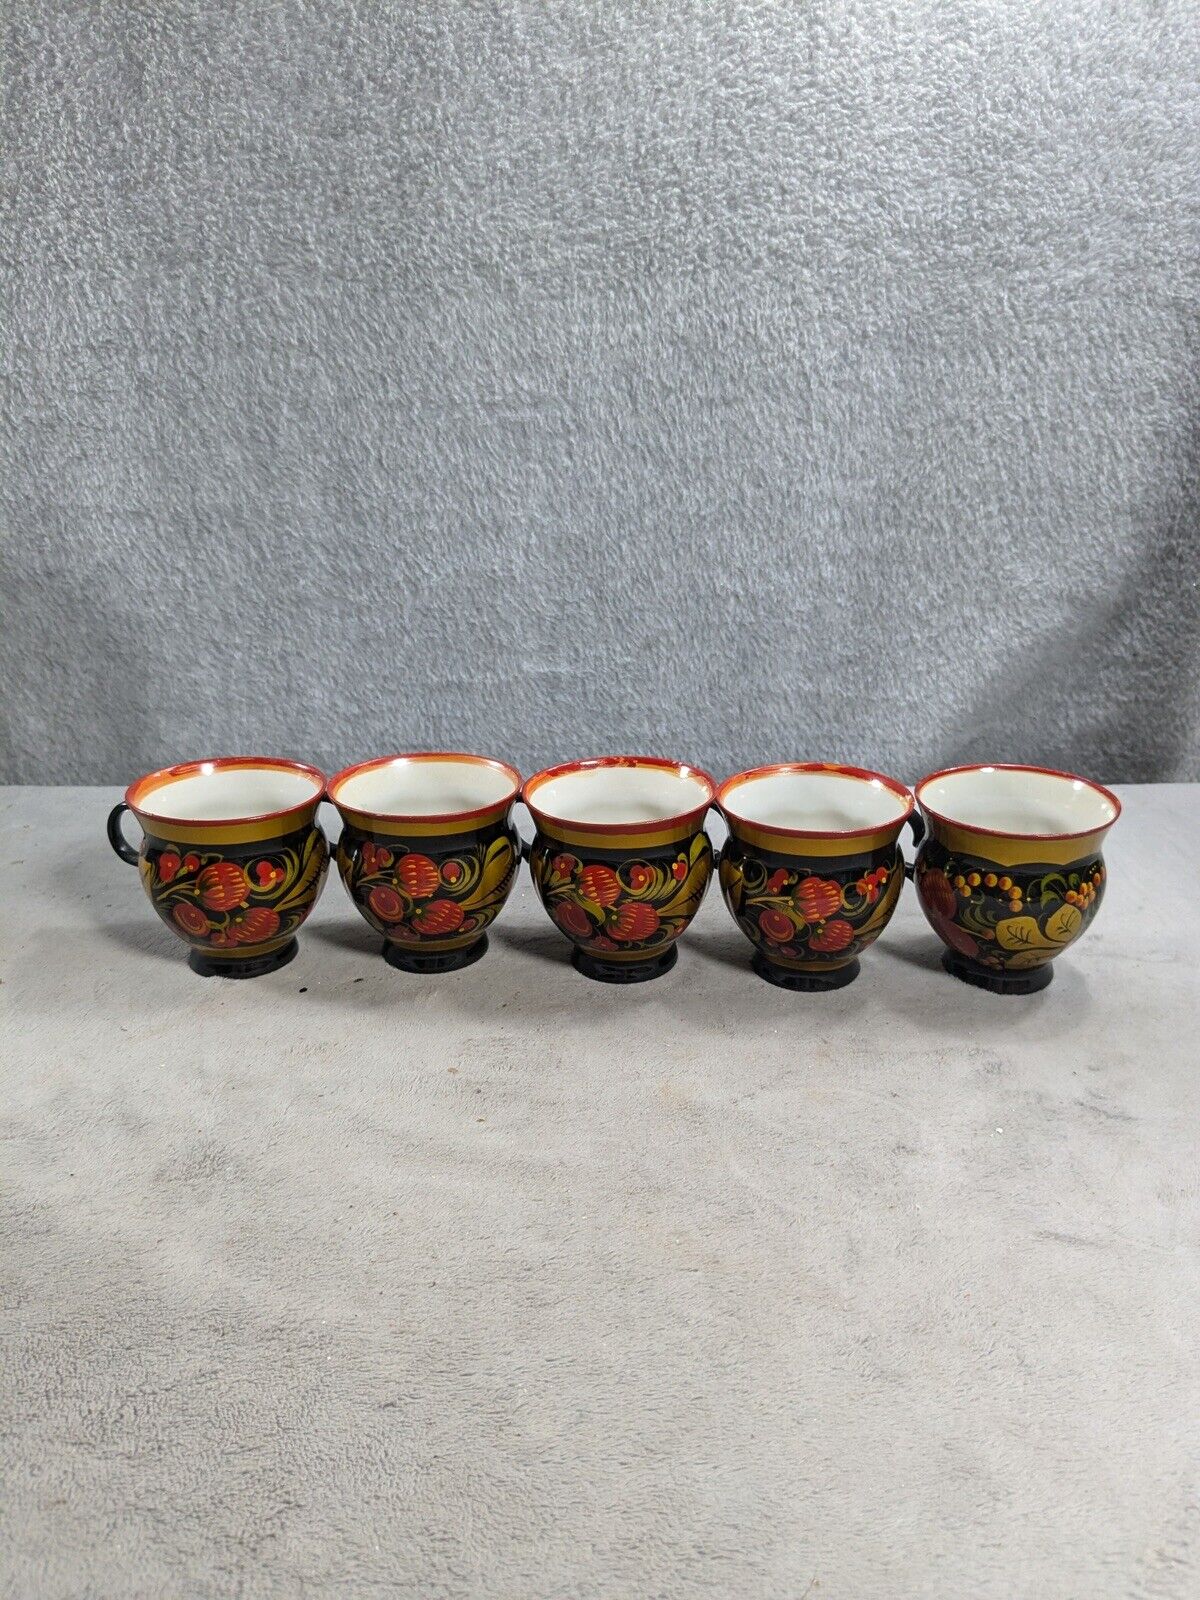 Lot Of 5 Russian Khokhloma Tea Cups 3” Tall Black And Red Floral Design